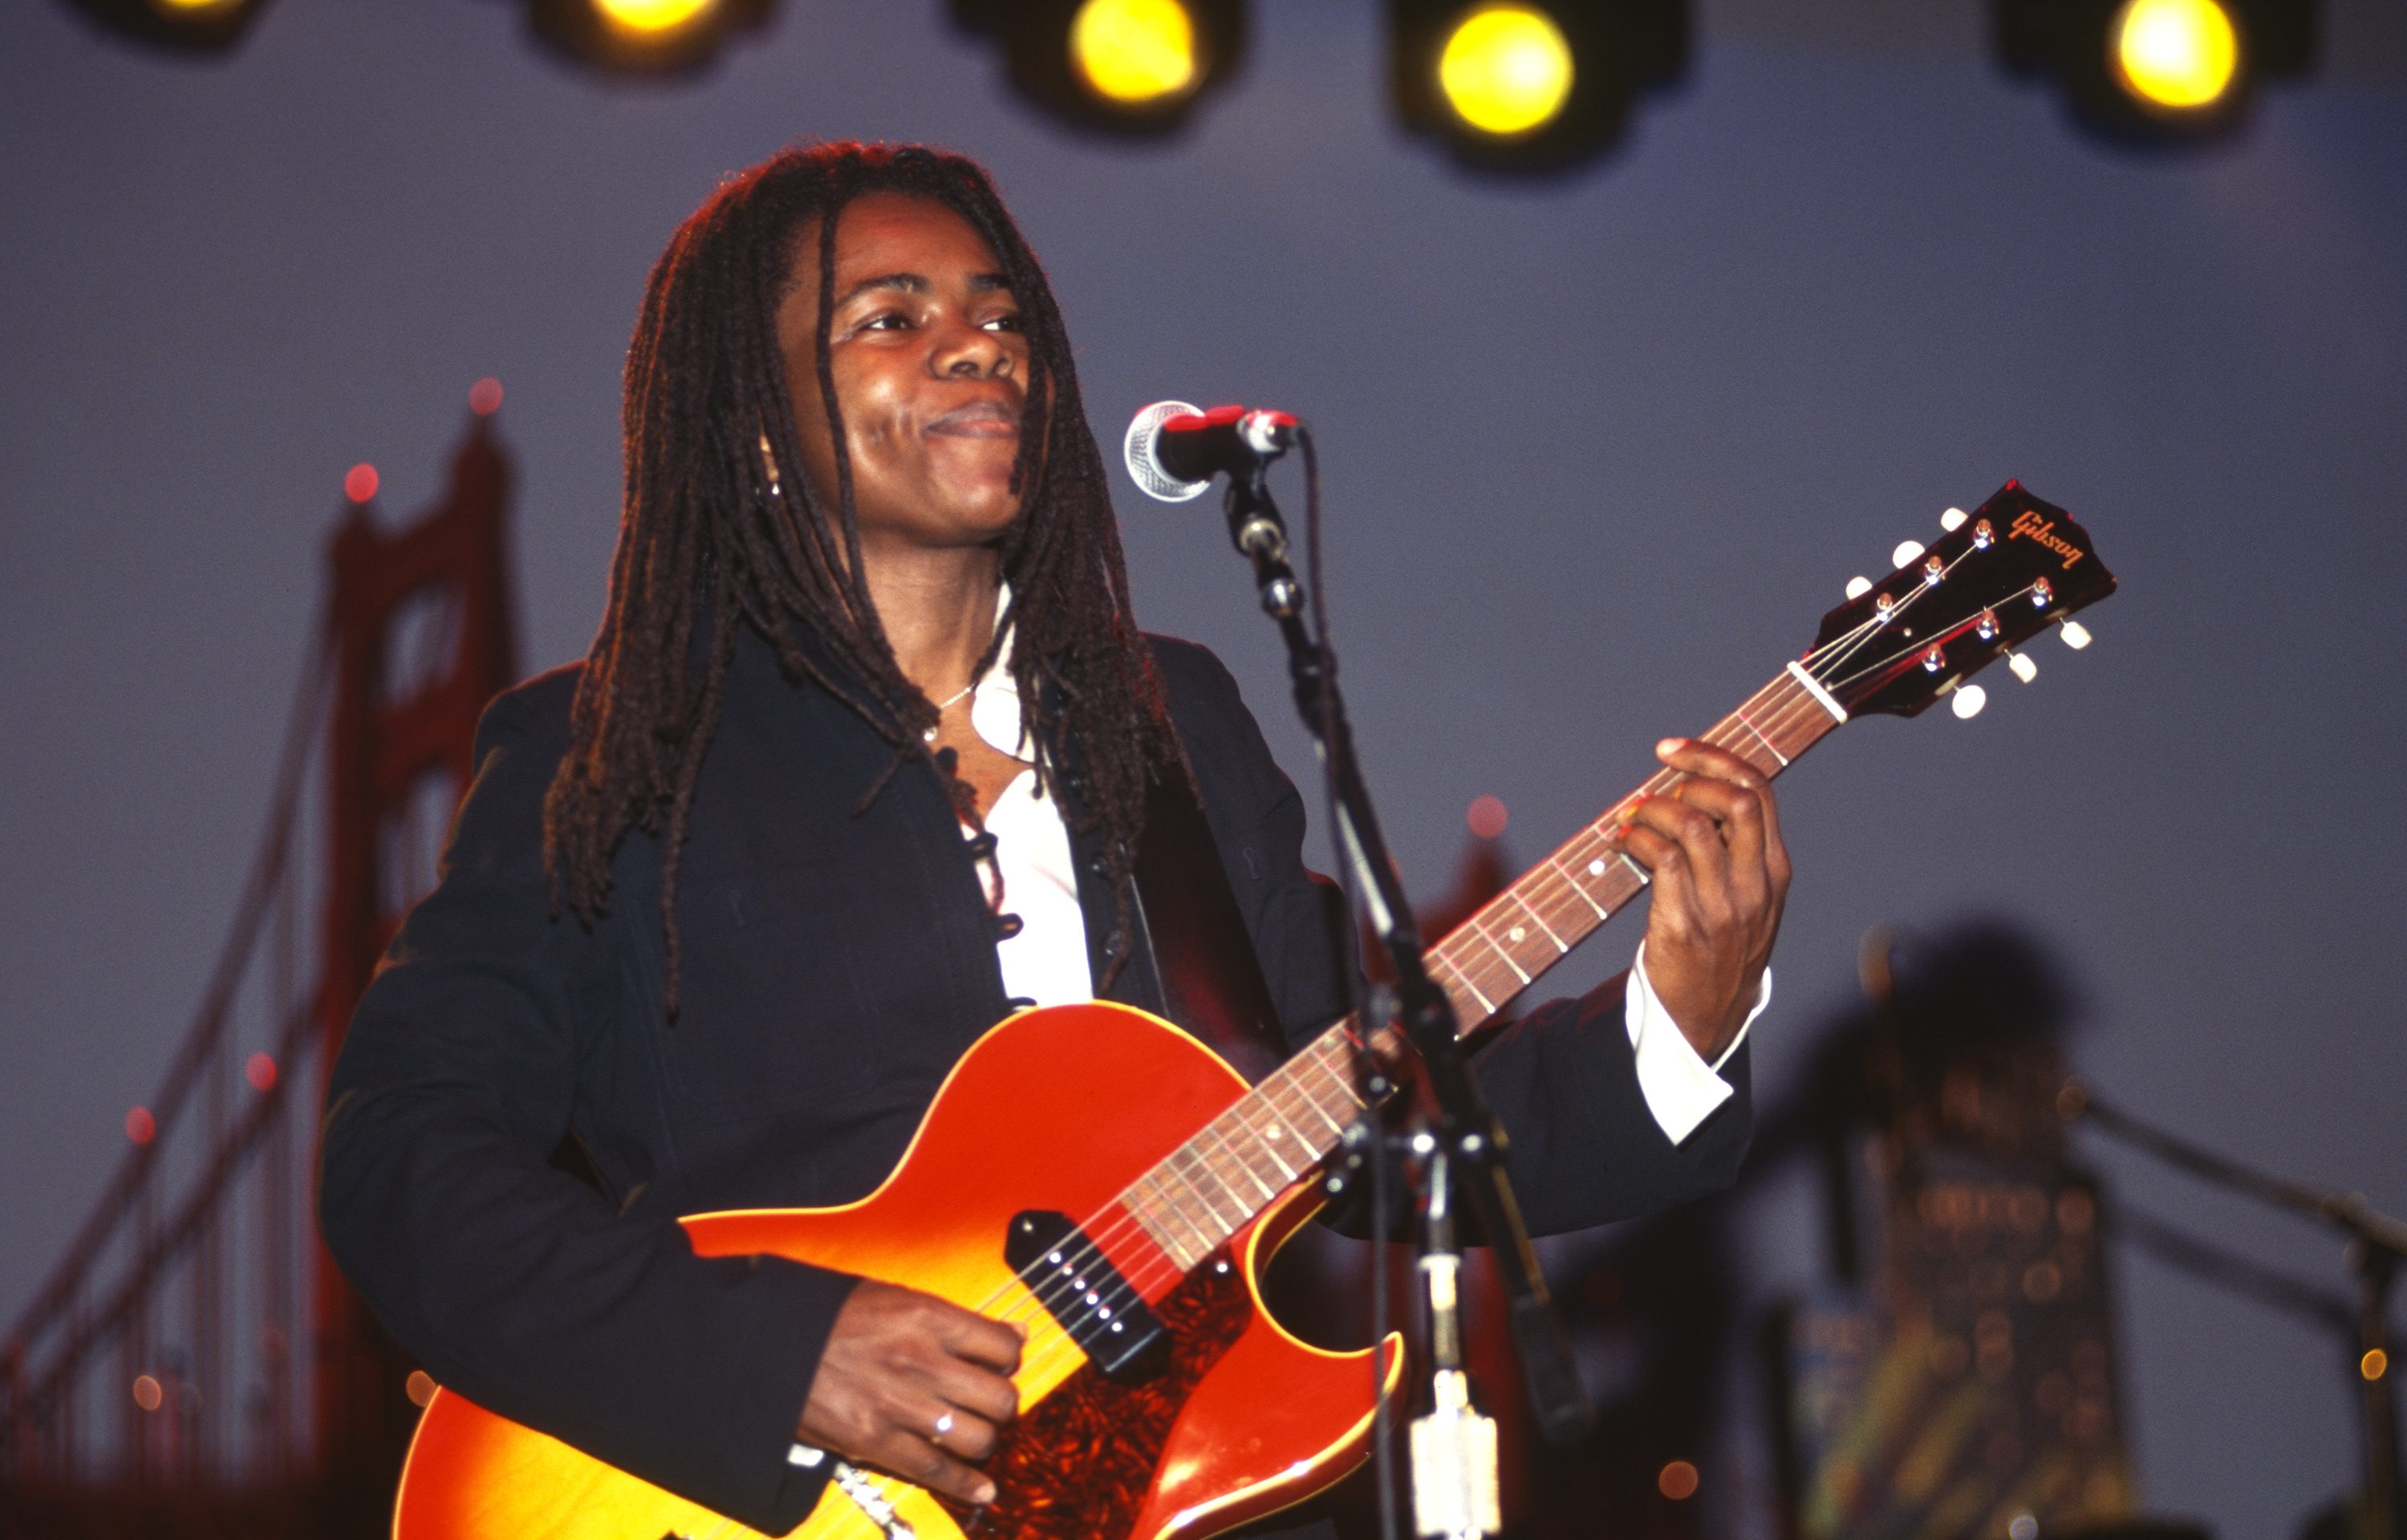 Tracy Chapman performs during the Bay Area Music Awards at Bill Graham Civic Auditorium on March 15, 1997 in San Francisco, California.